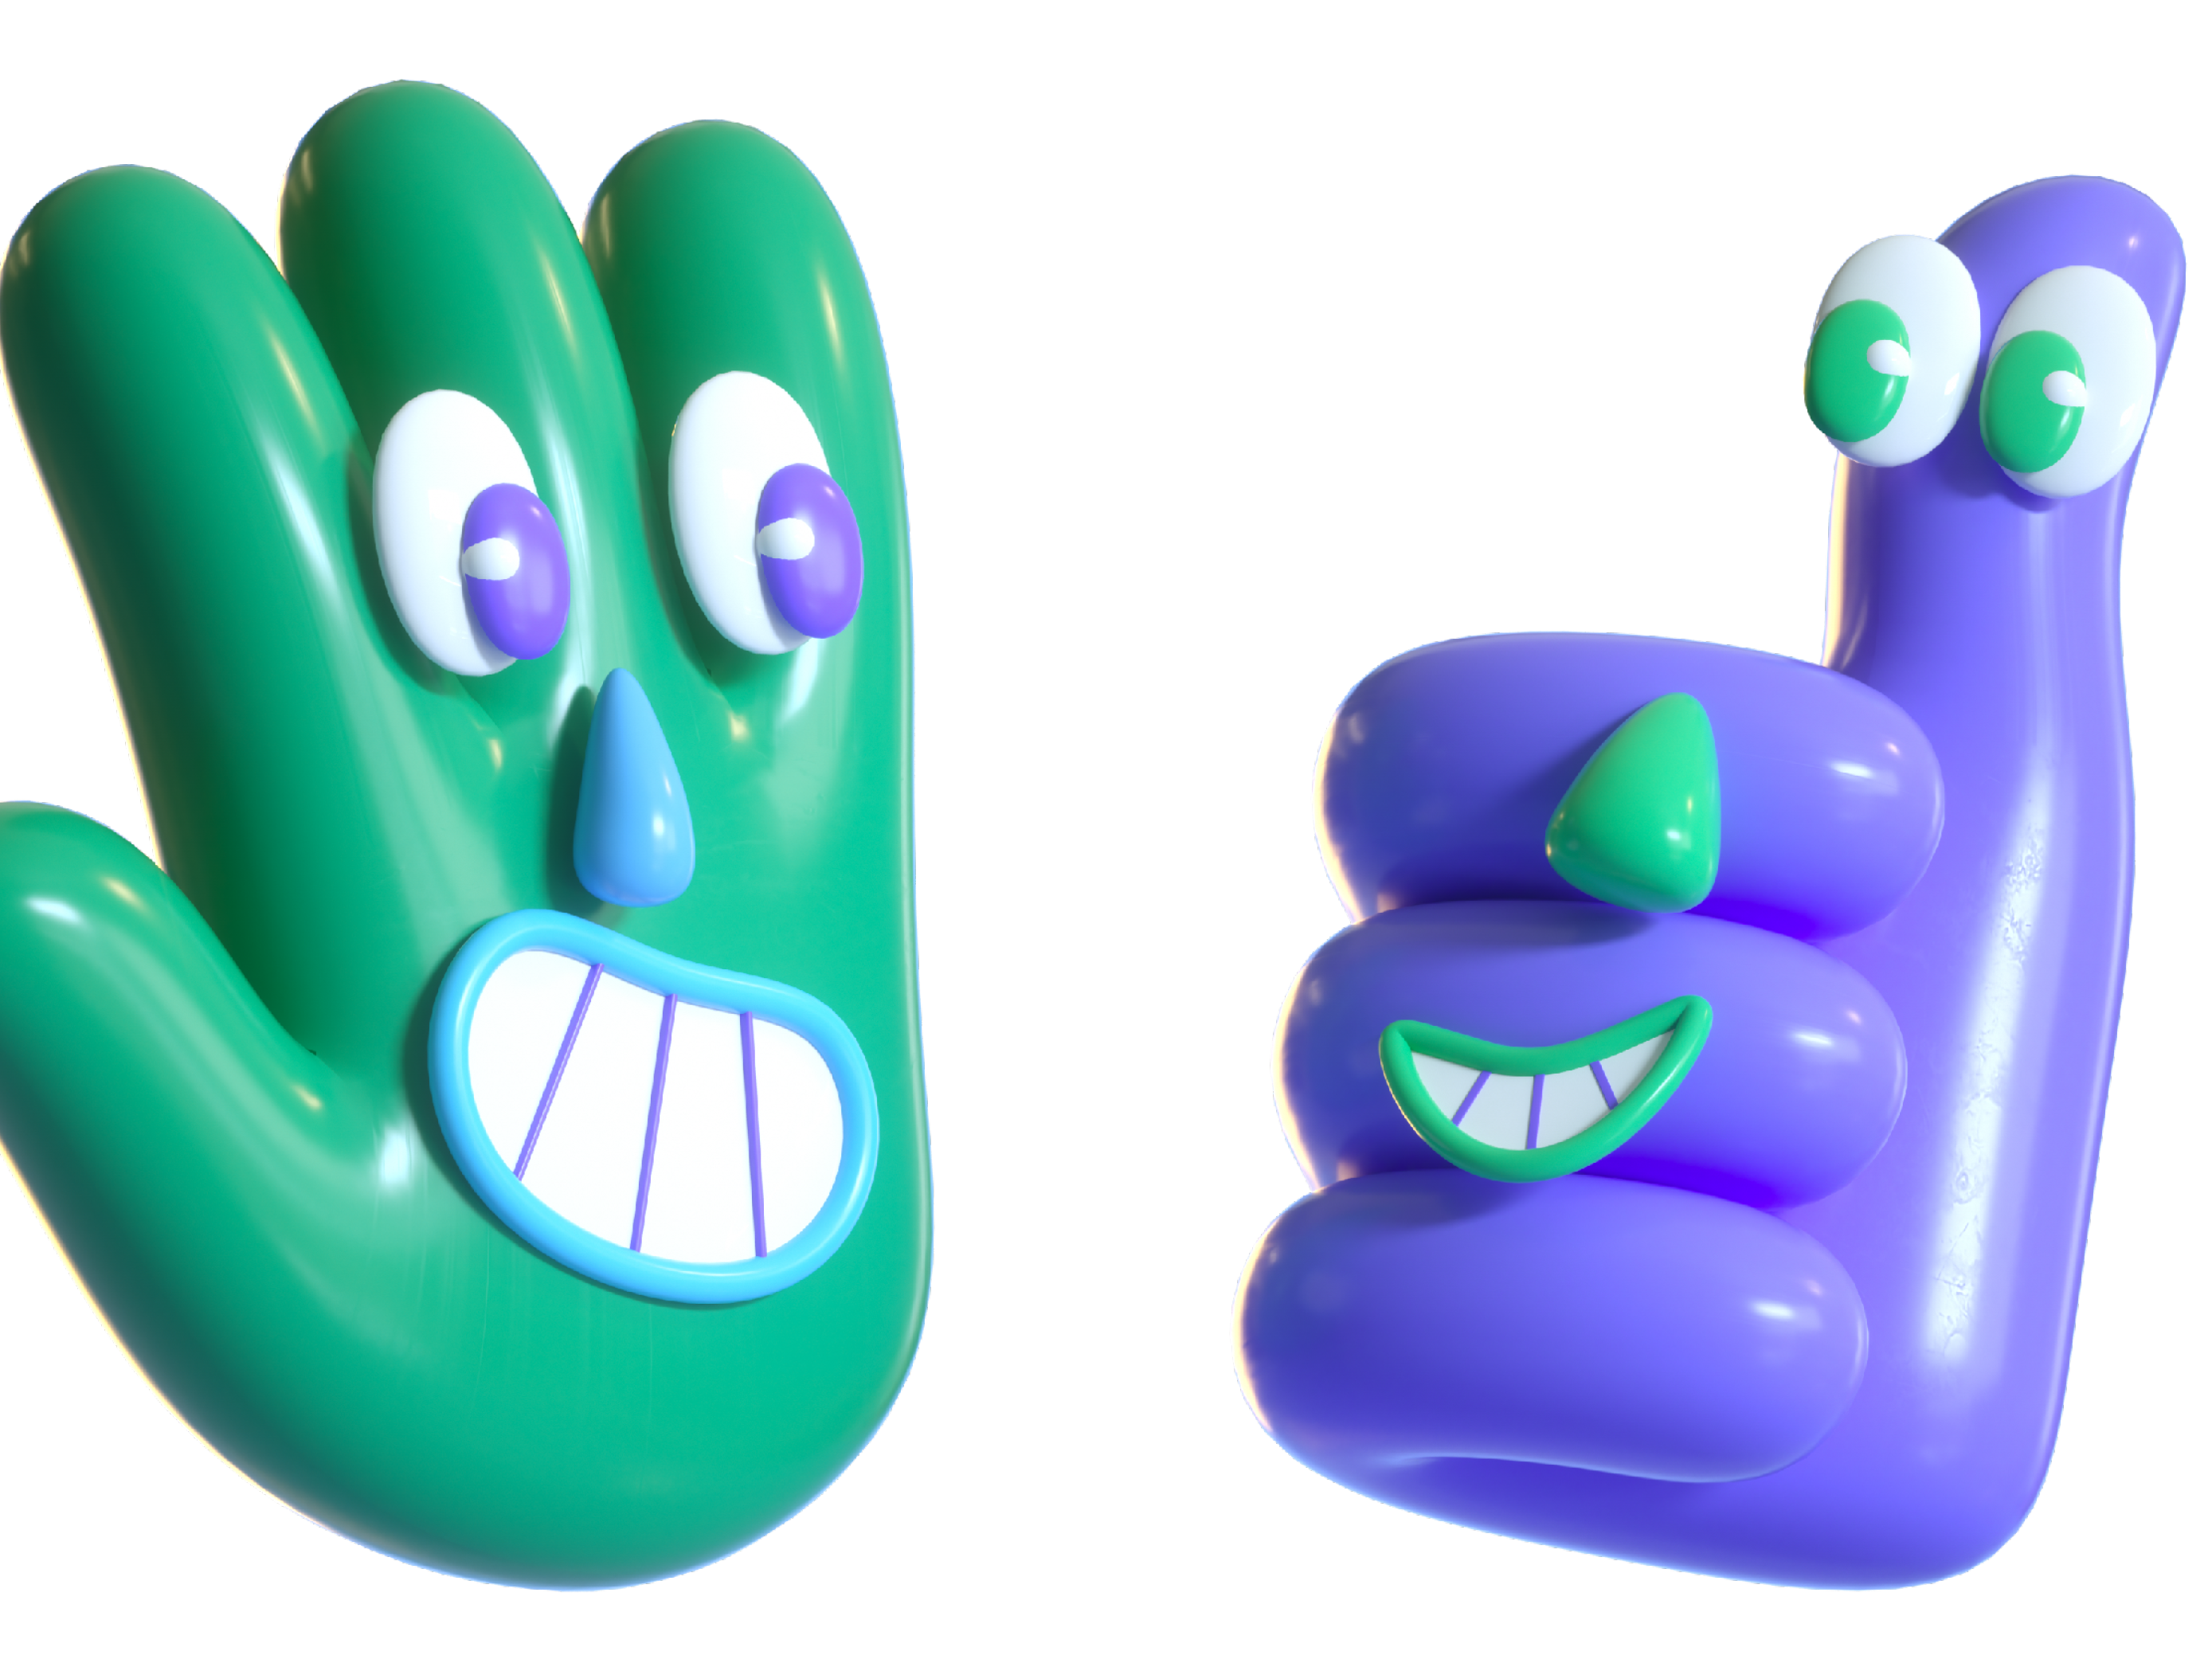 Green smiling hand and purple 'thumbs up'.